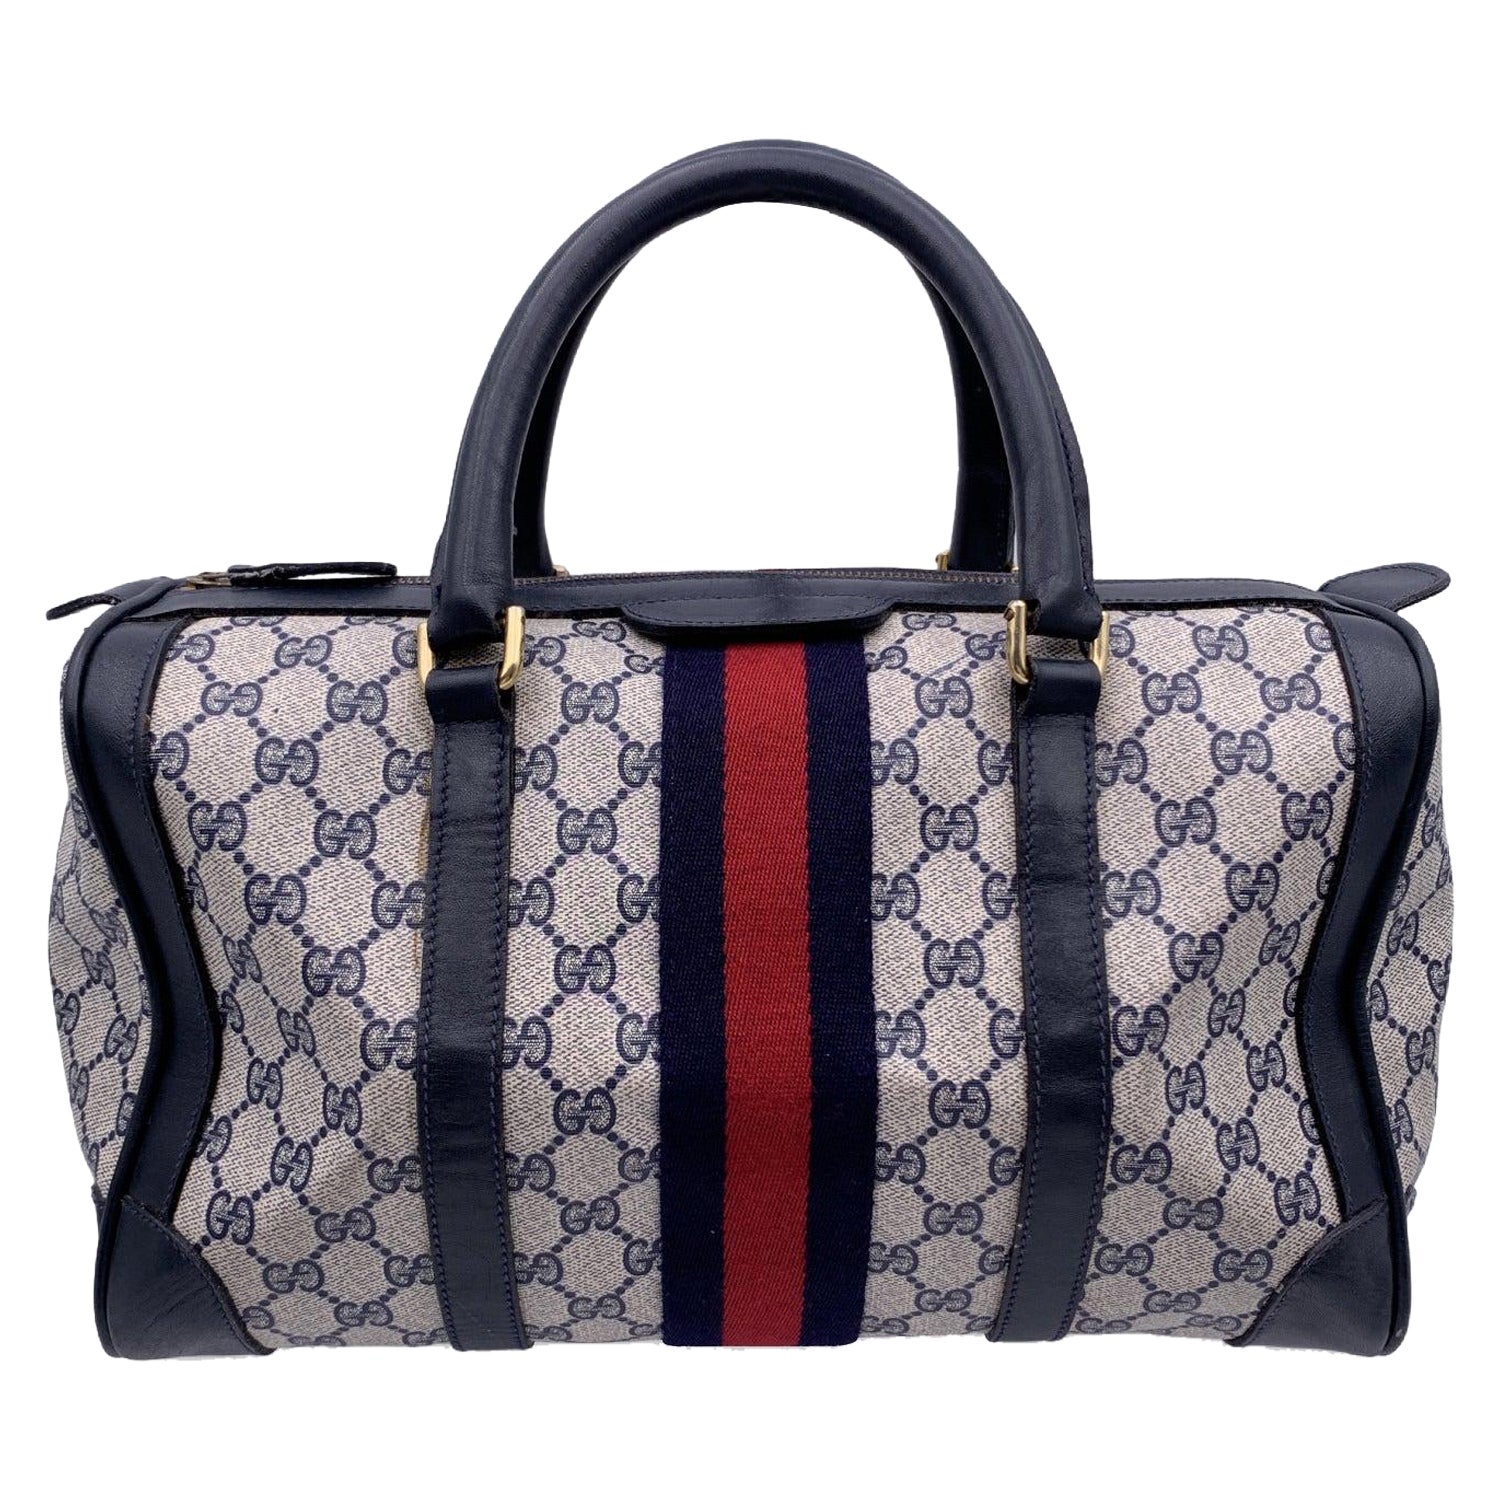 Gucci - Authenticated Boston Handbag - Cloth Blue for Women, Very Good Condition